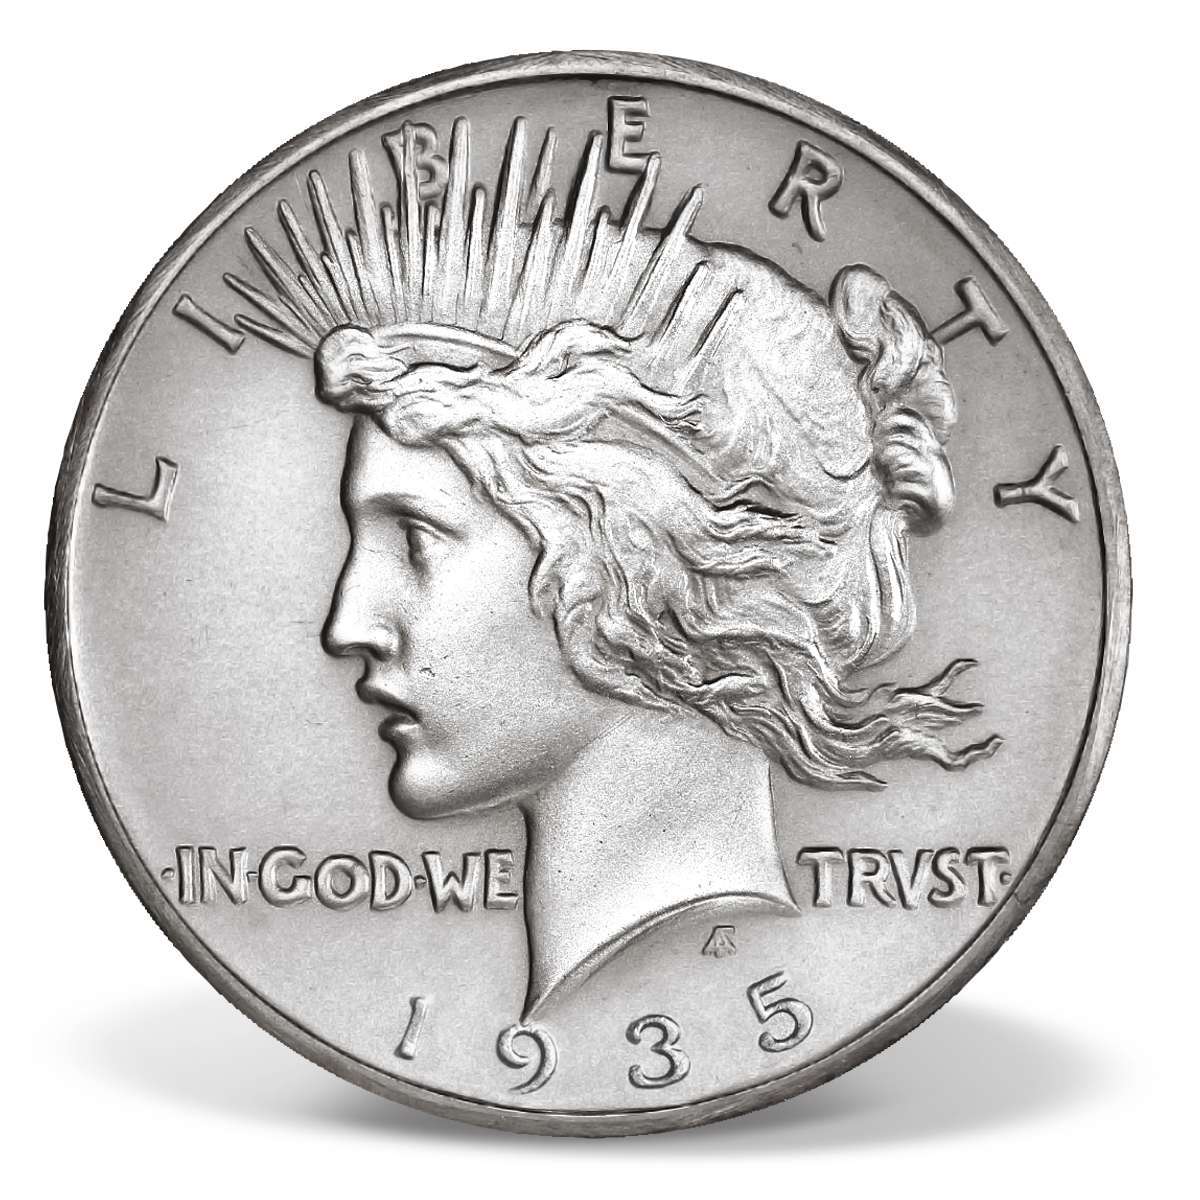 u.s.mint silver coins for sale